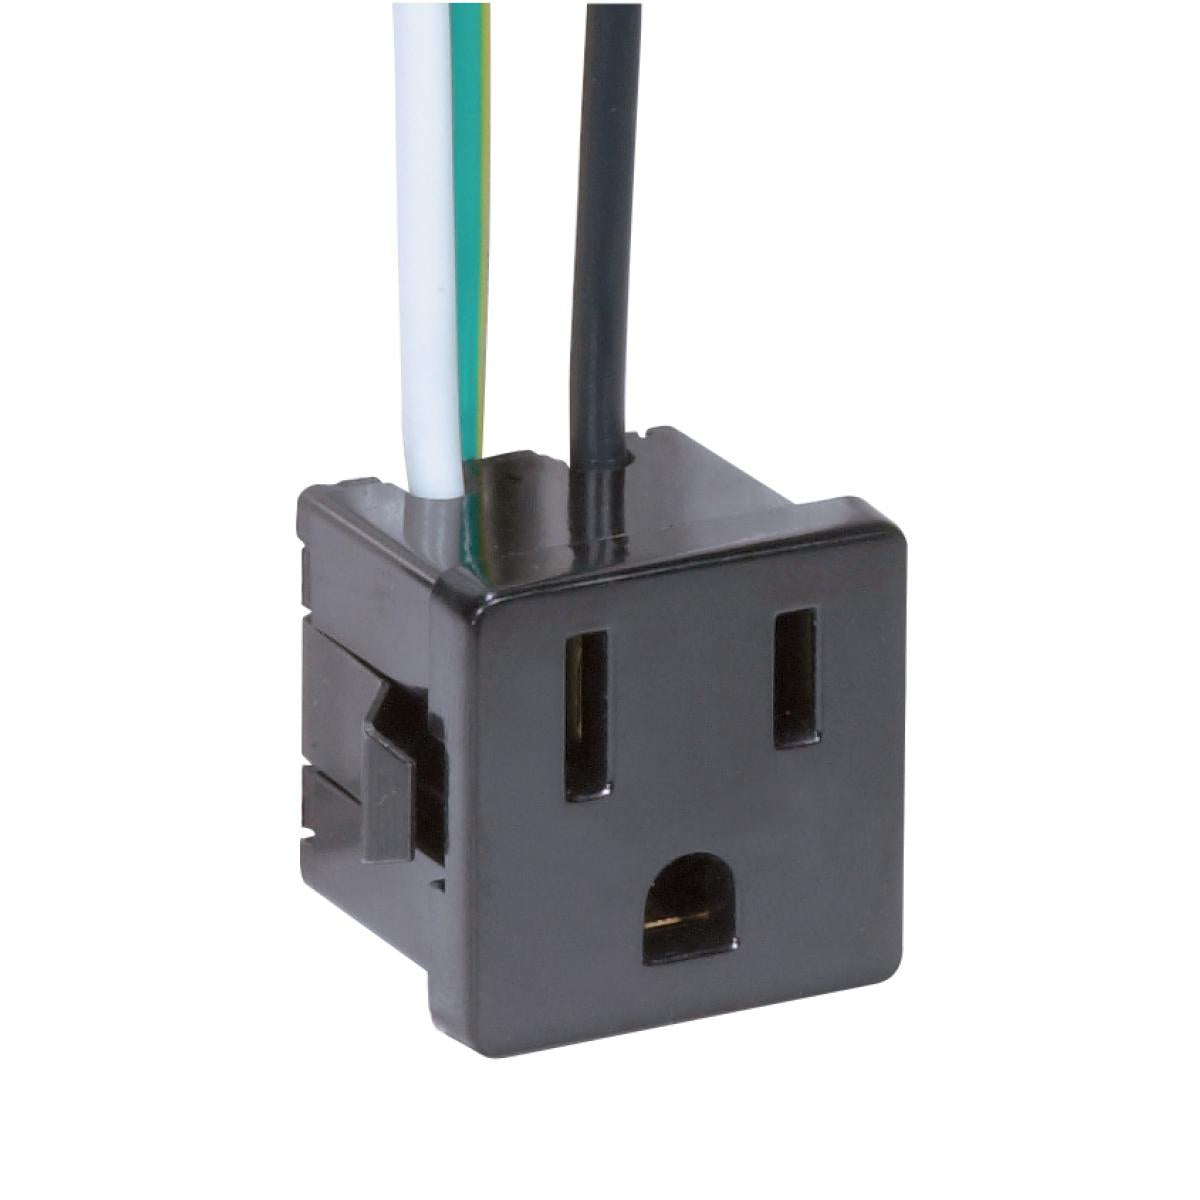 Satco 80-1142 3 Wire, 2 Pole Snap-In Convenience Outlet, Opening Size: 1" x 1" x 1" Rated: 15A-125V